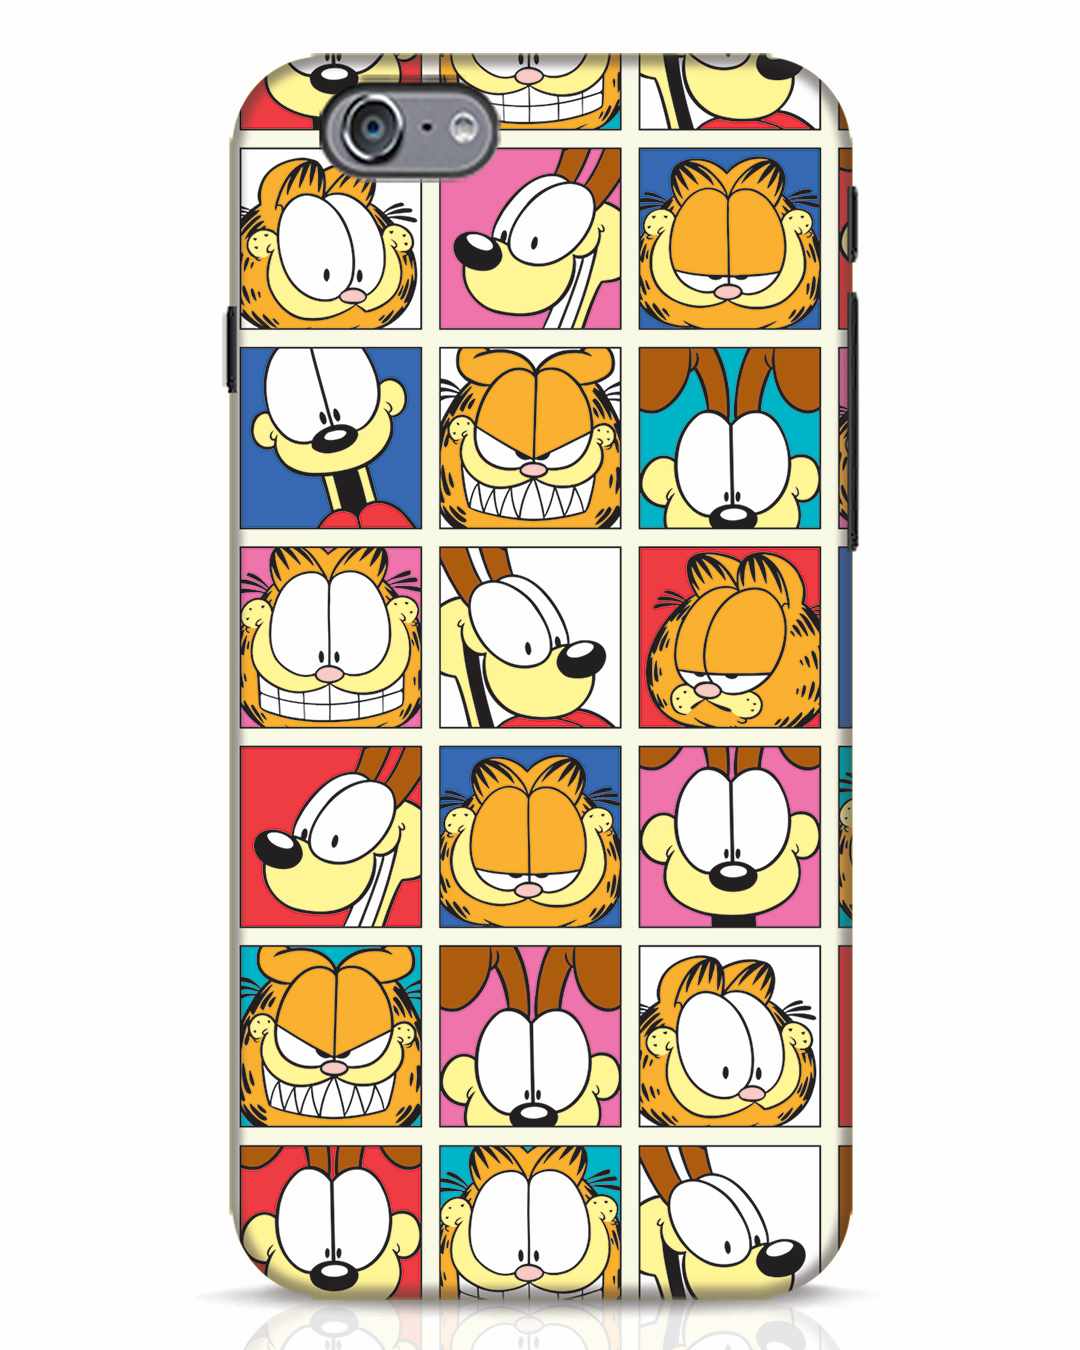 Garfield Charecter Faces iPhone 6 Mobile Cover iPhone 6 Mobile Covers Bewakoof.com